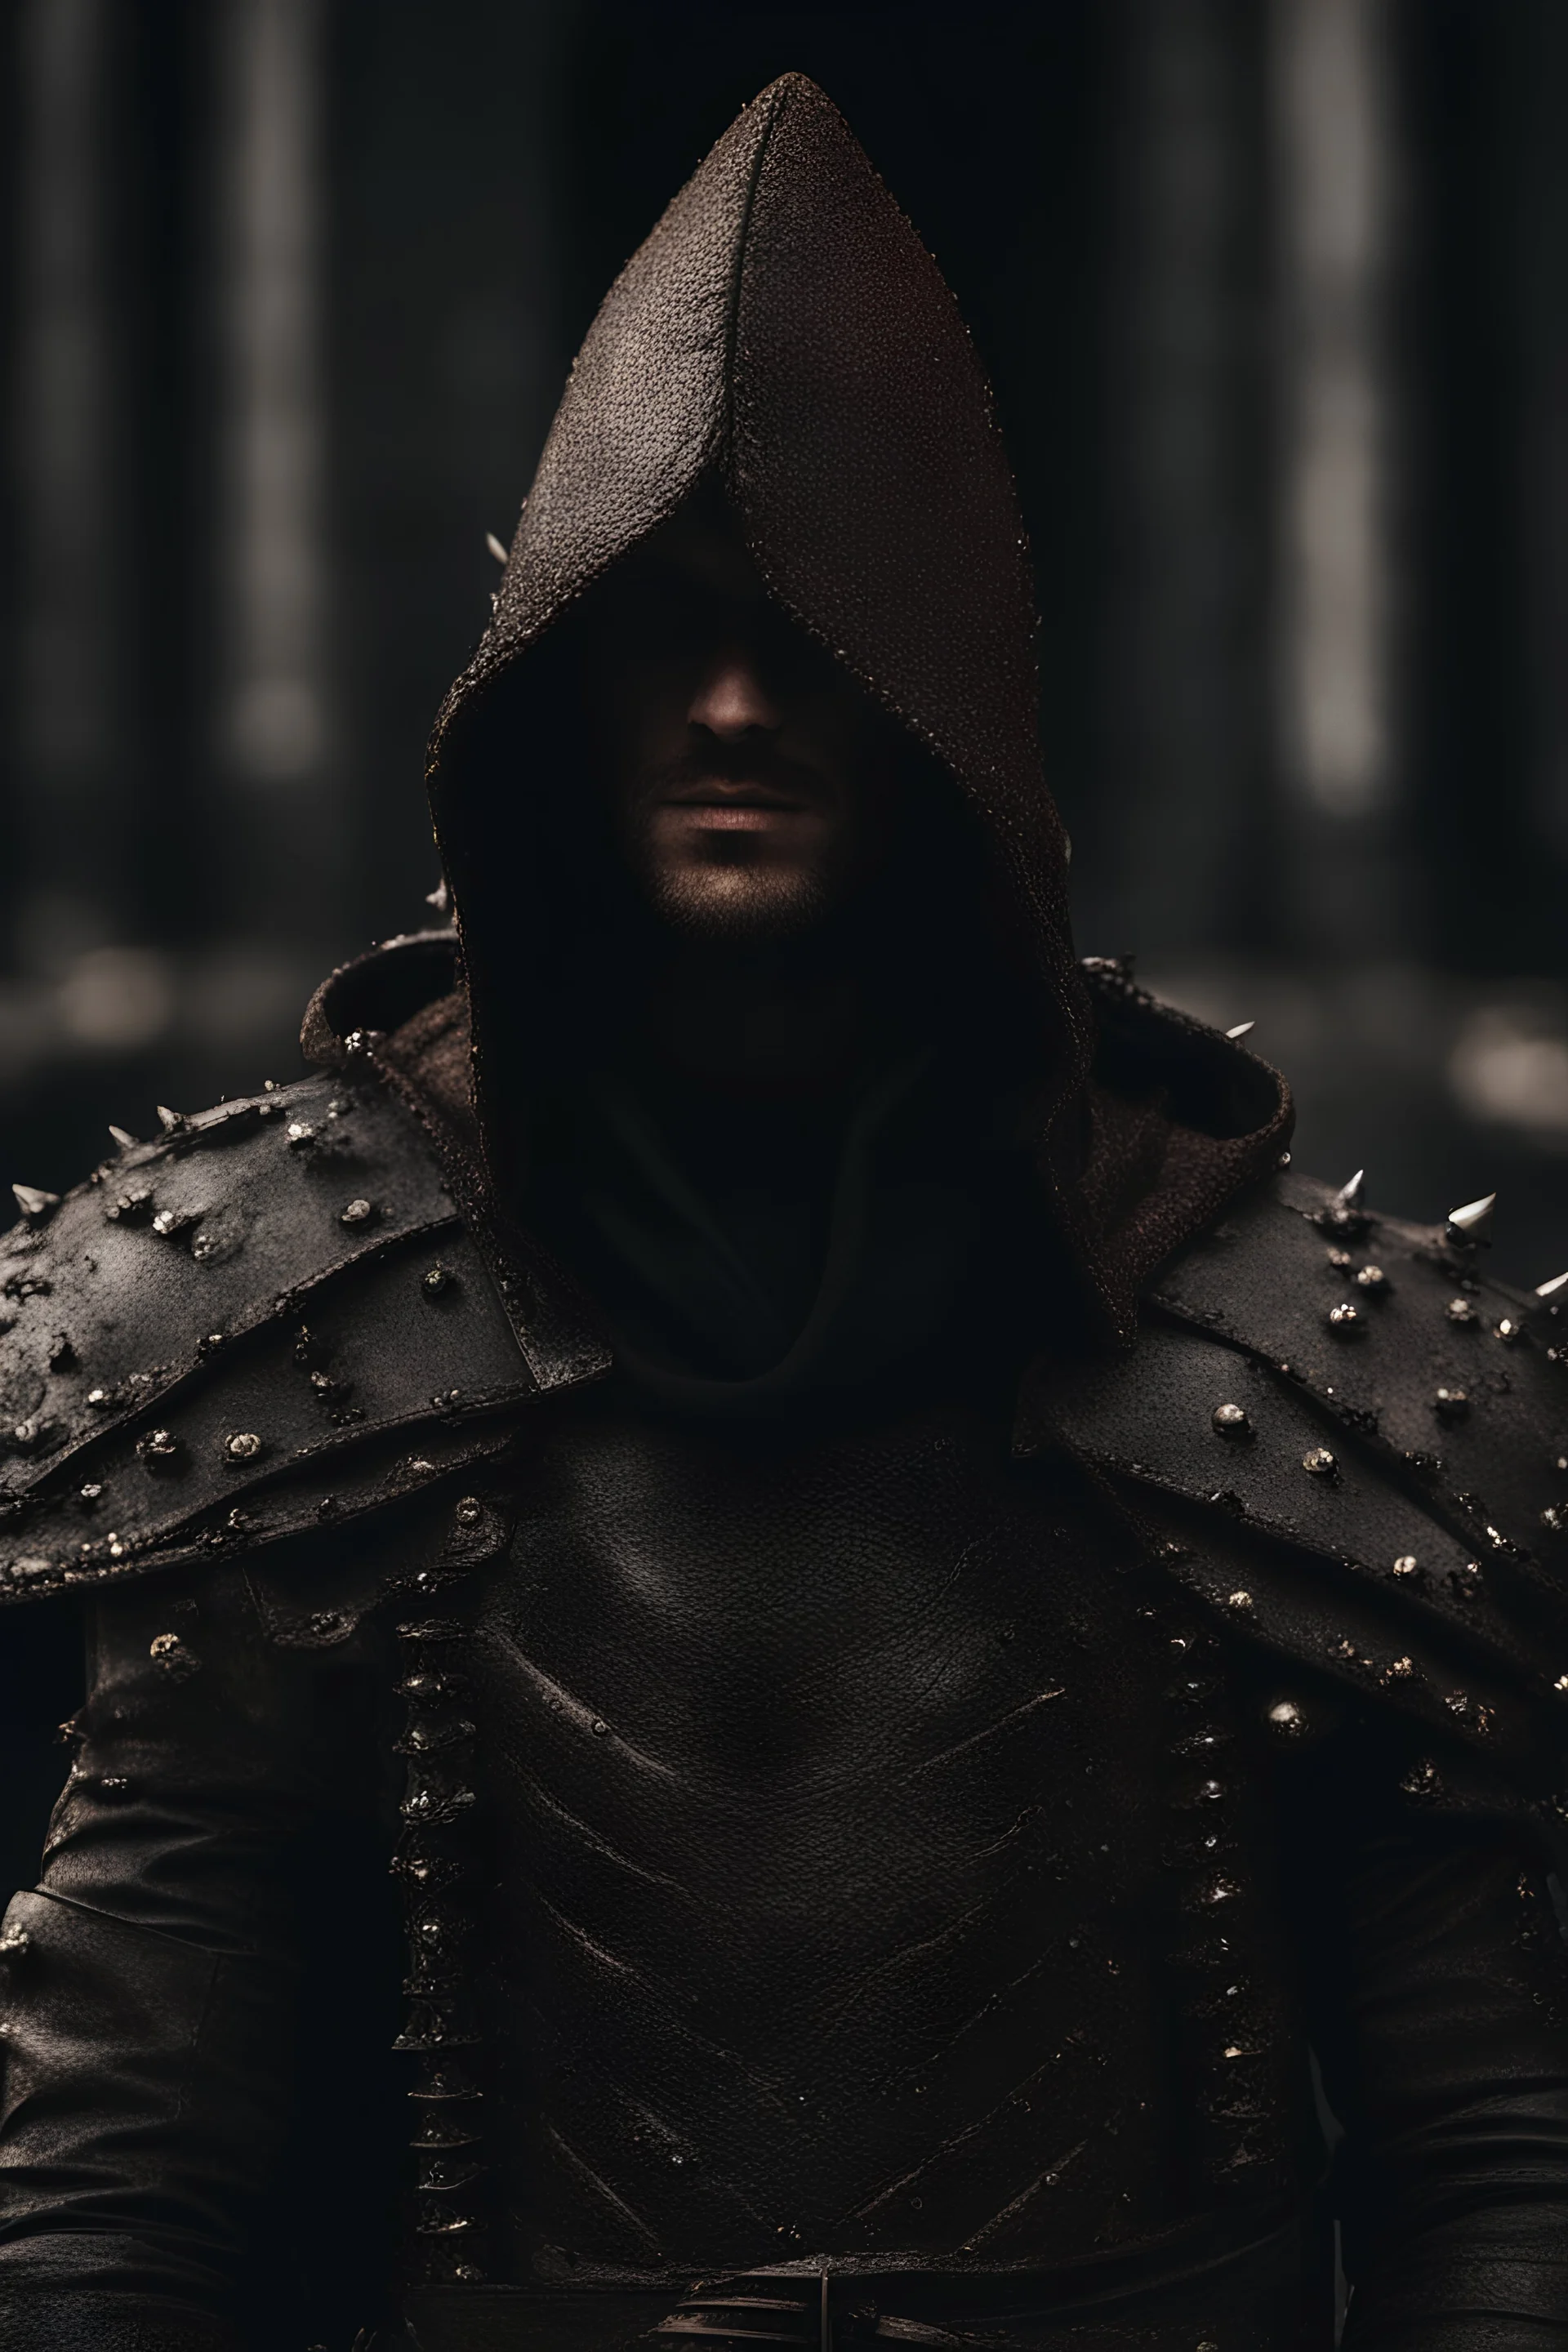 hooded man wearing studded leather armor